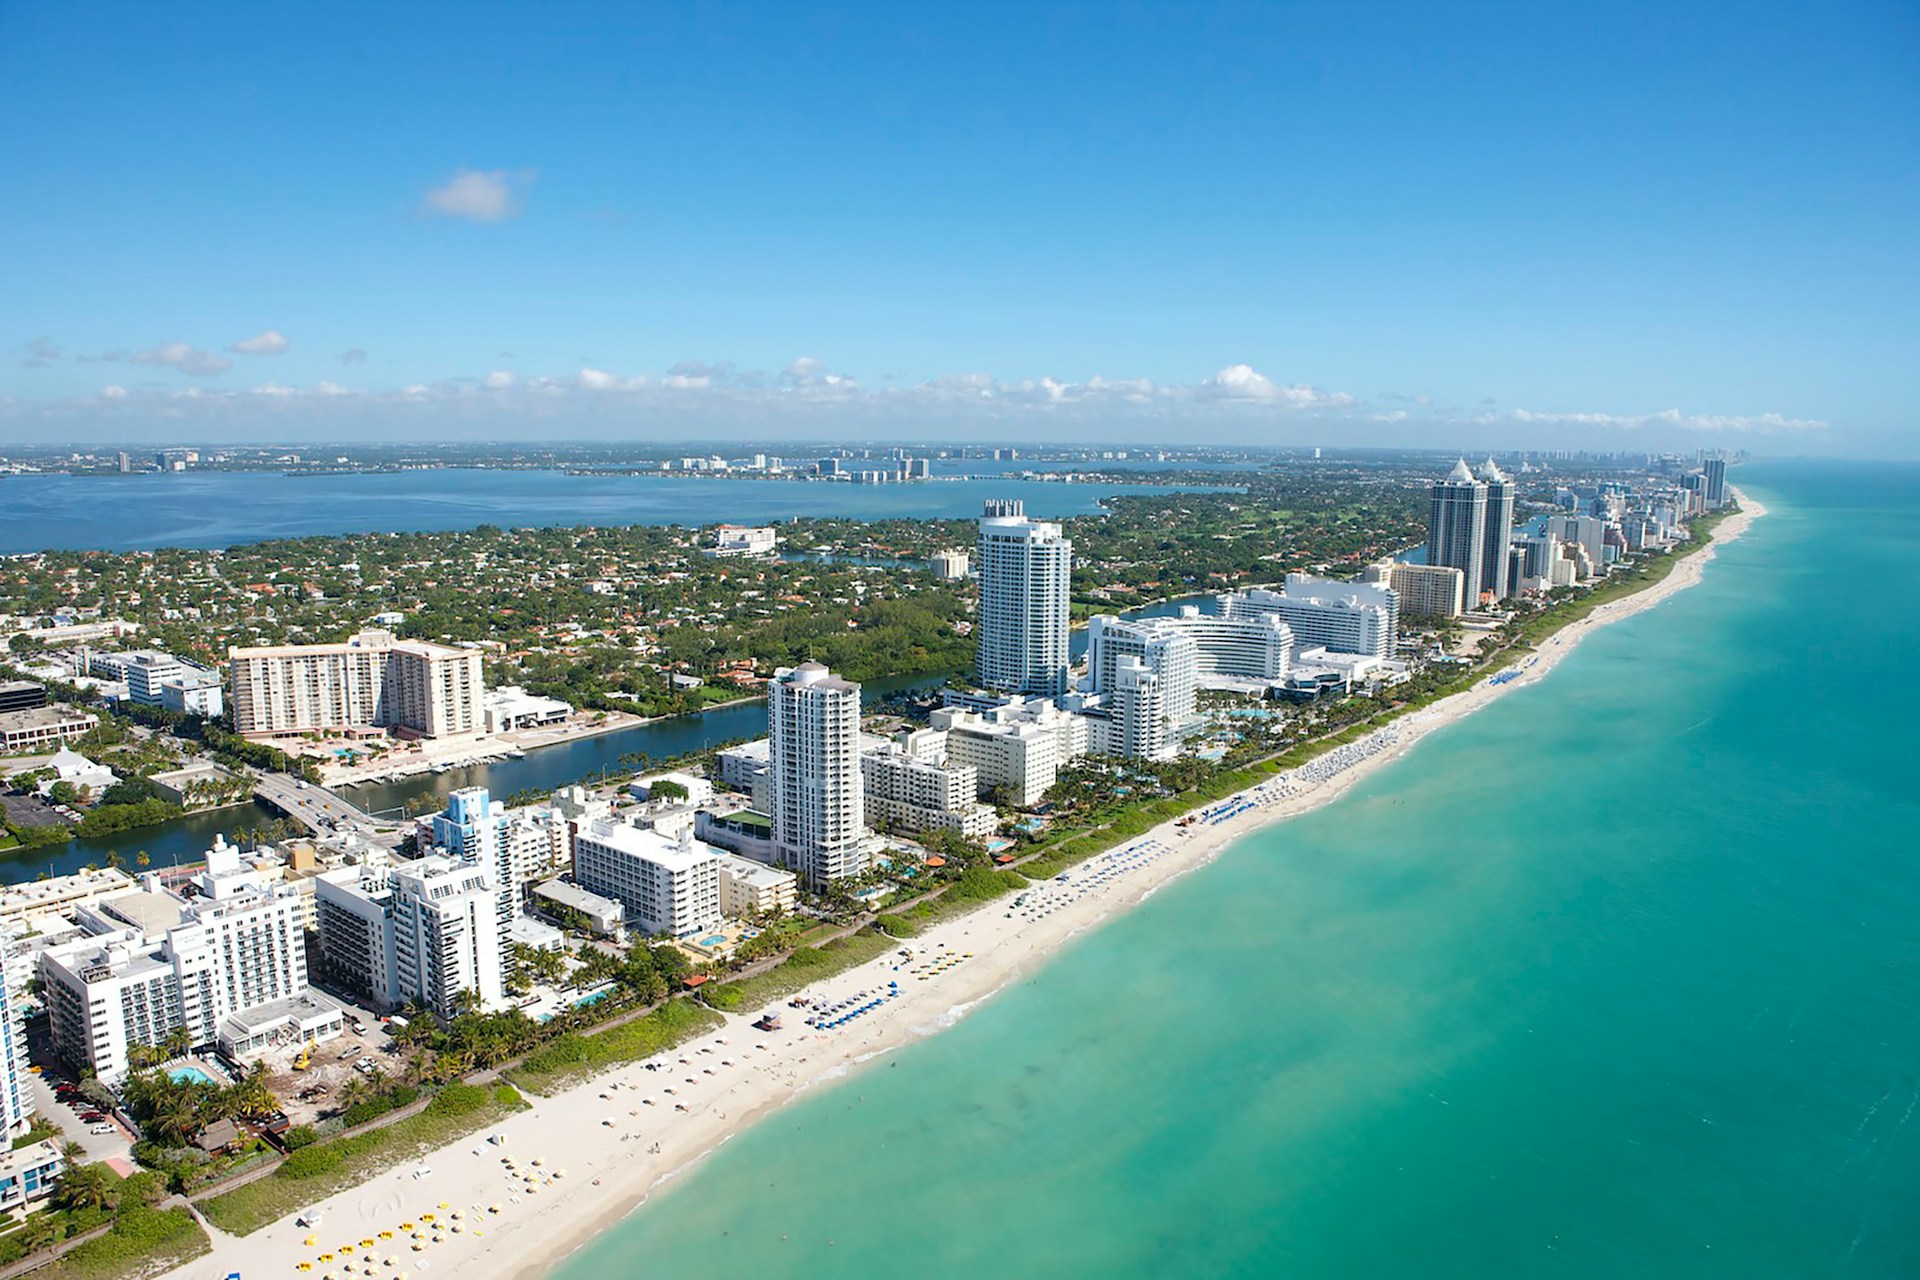 <p>Miami is known for its partying beaches, exciting nightlife, and colorful architecture. It’s a top destination among young adults looking for a fun summer experience.</p>